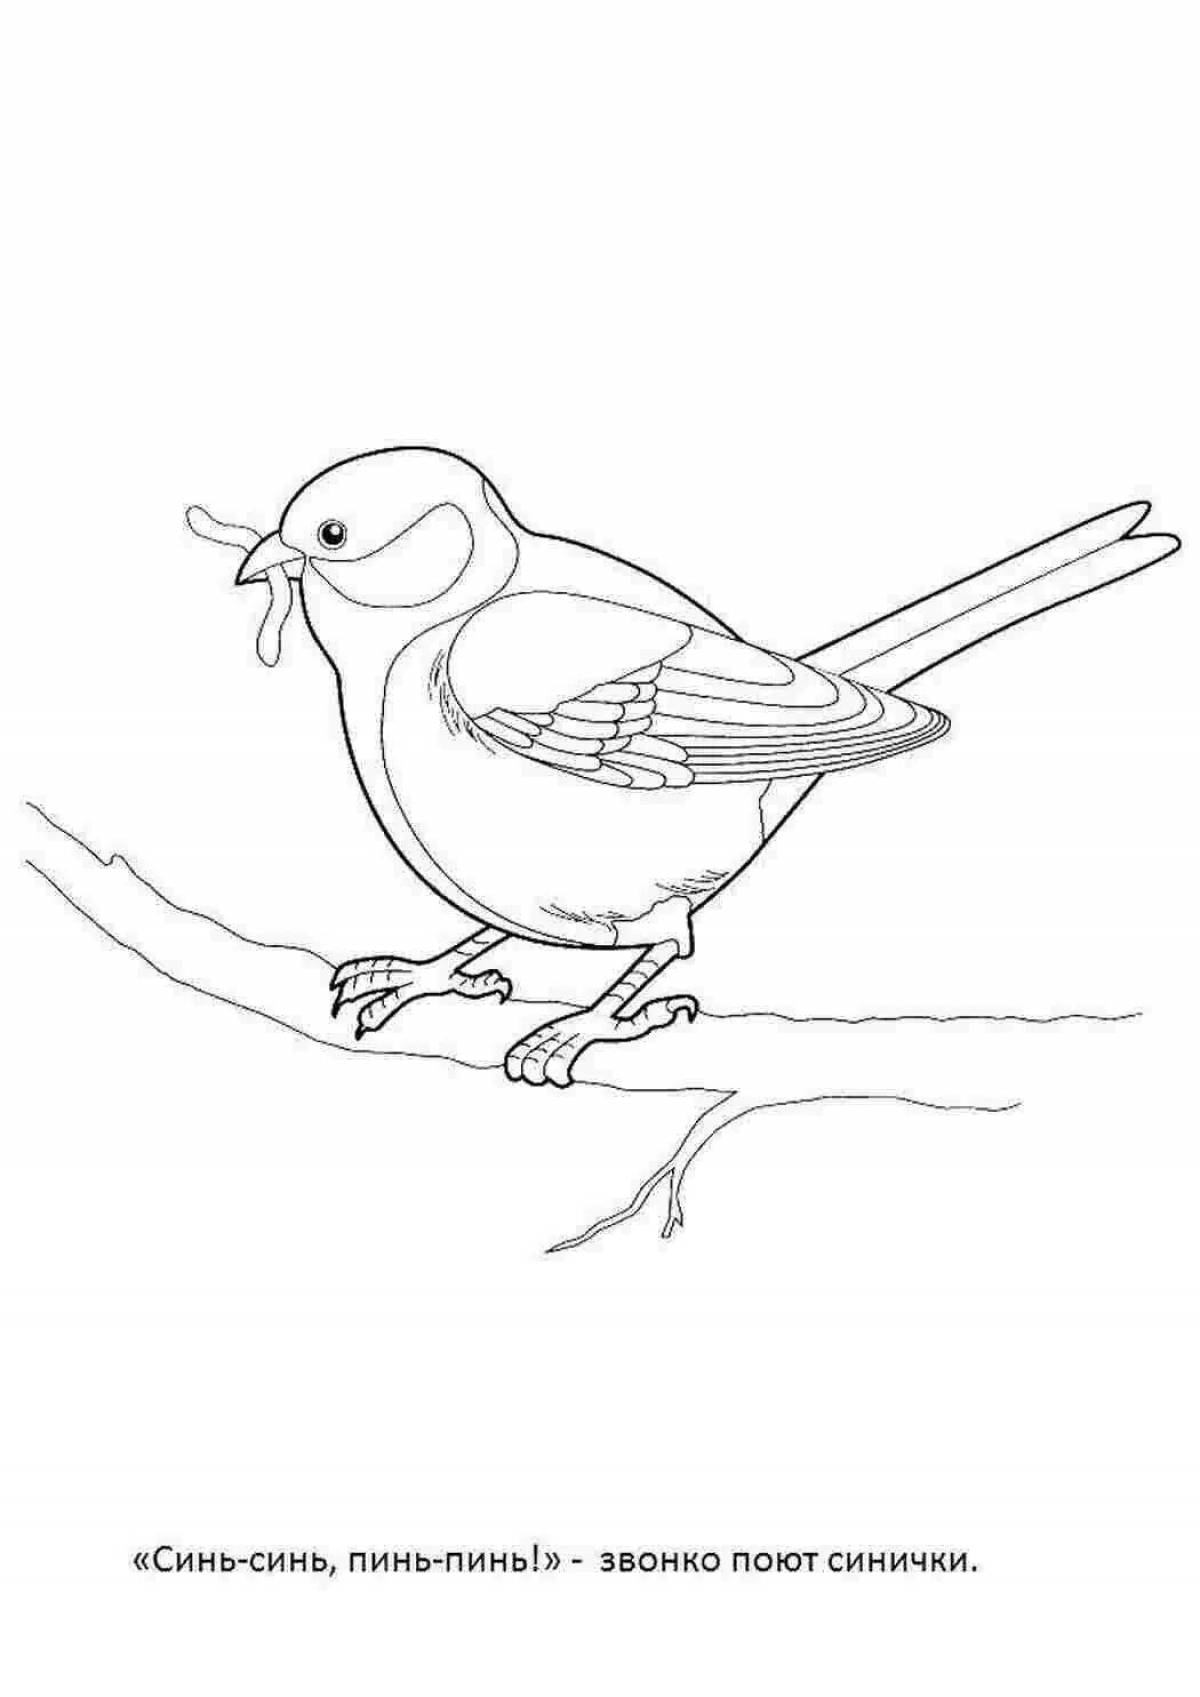 Tempting drawing of a titmouse